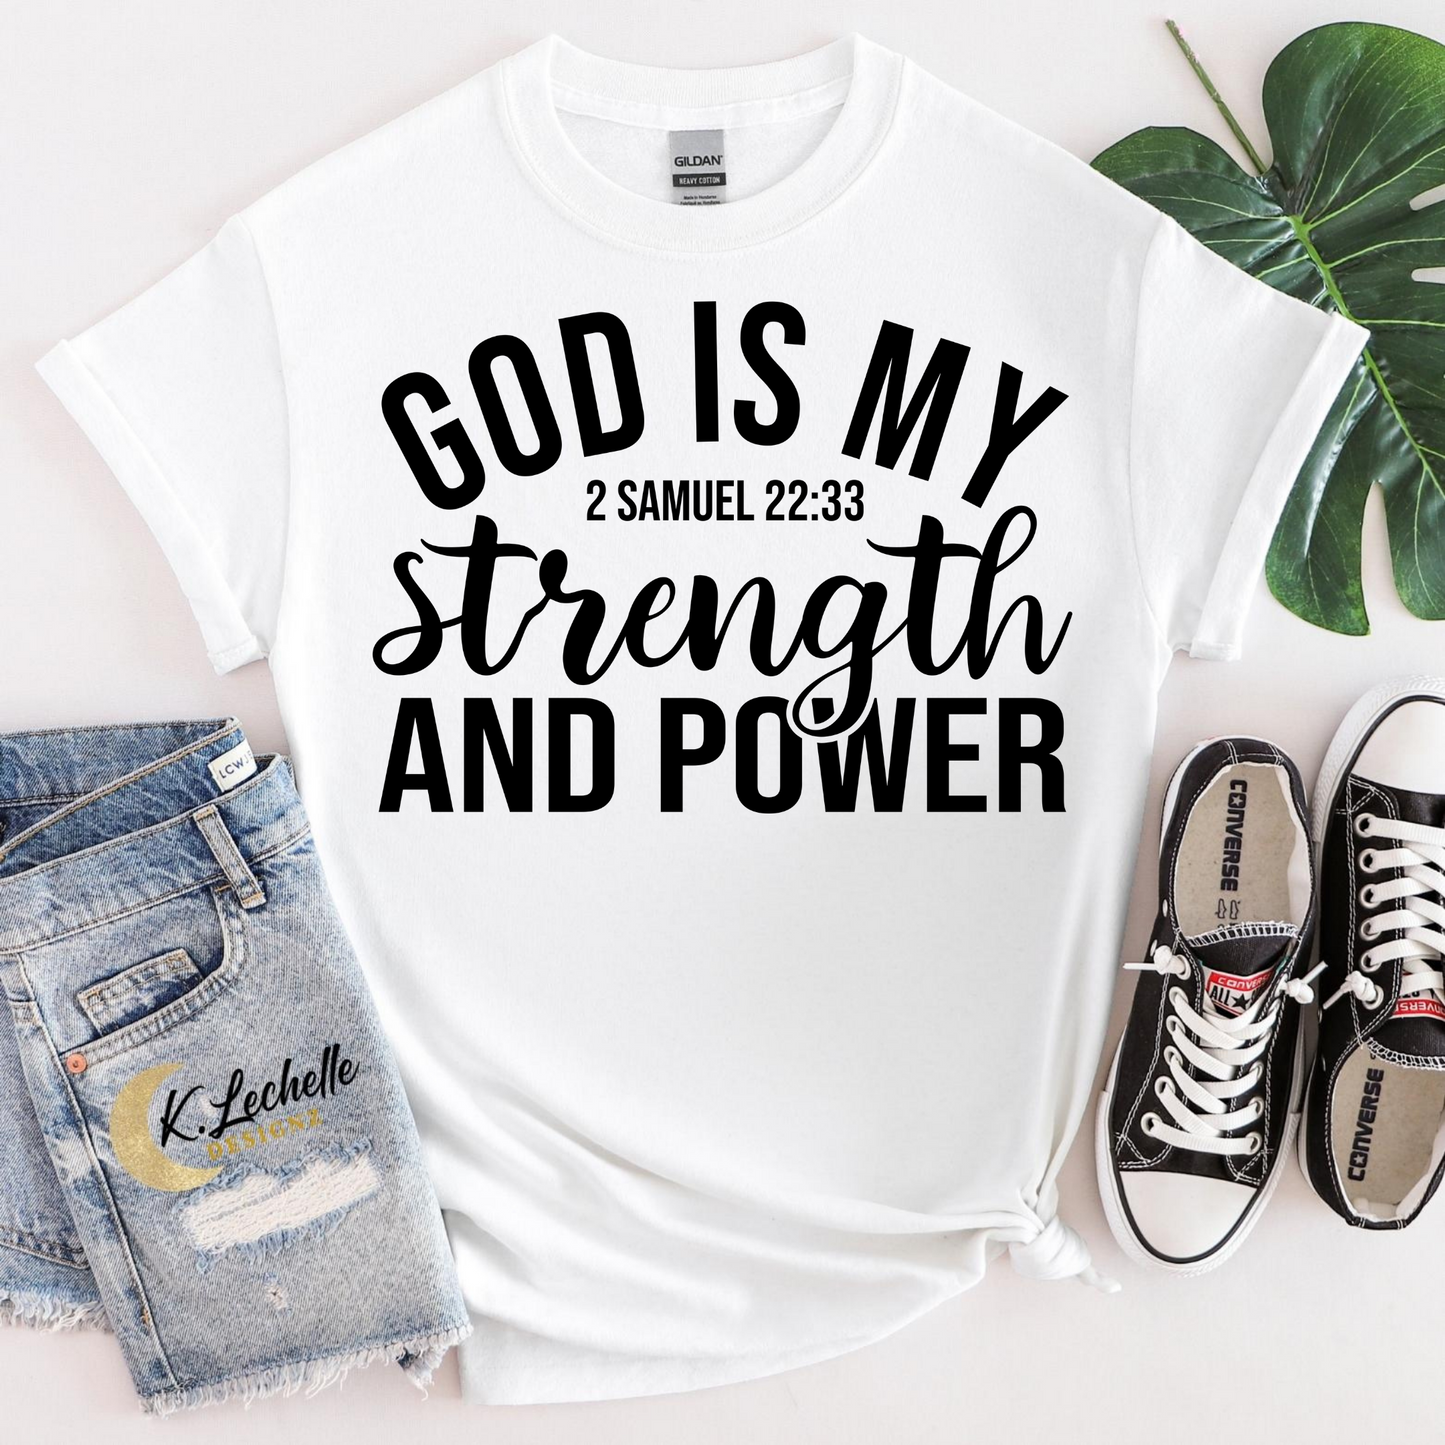 GOD IS MY STRENGTH AND POWER